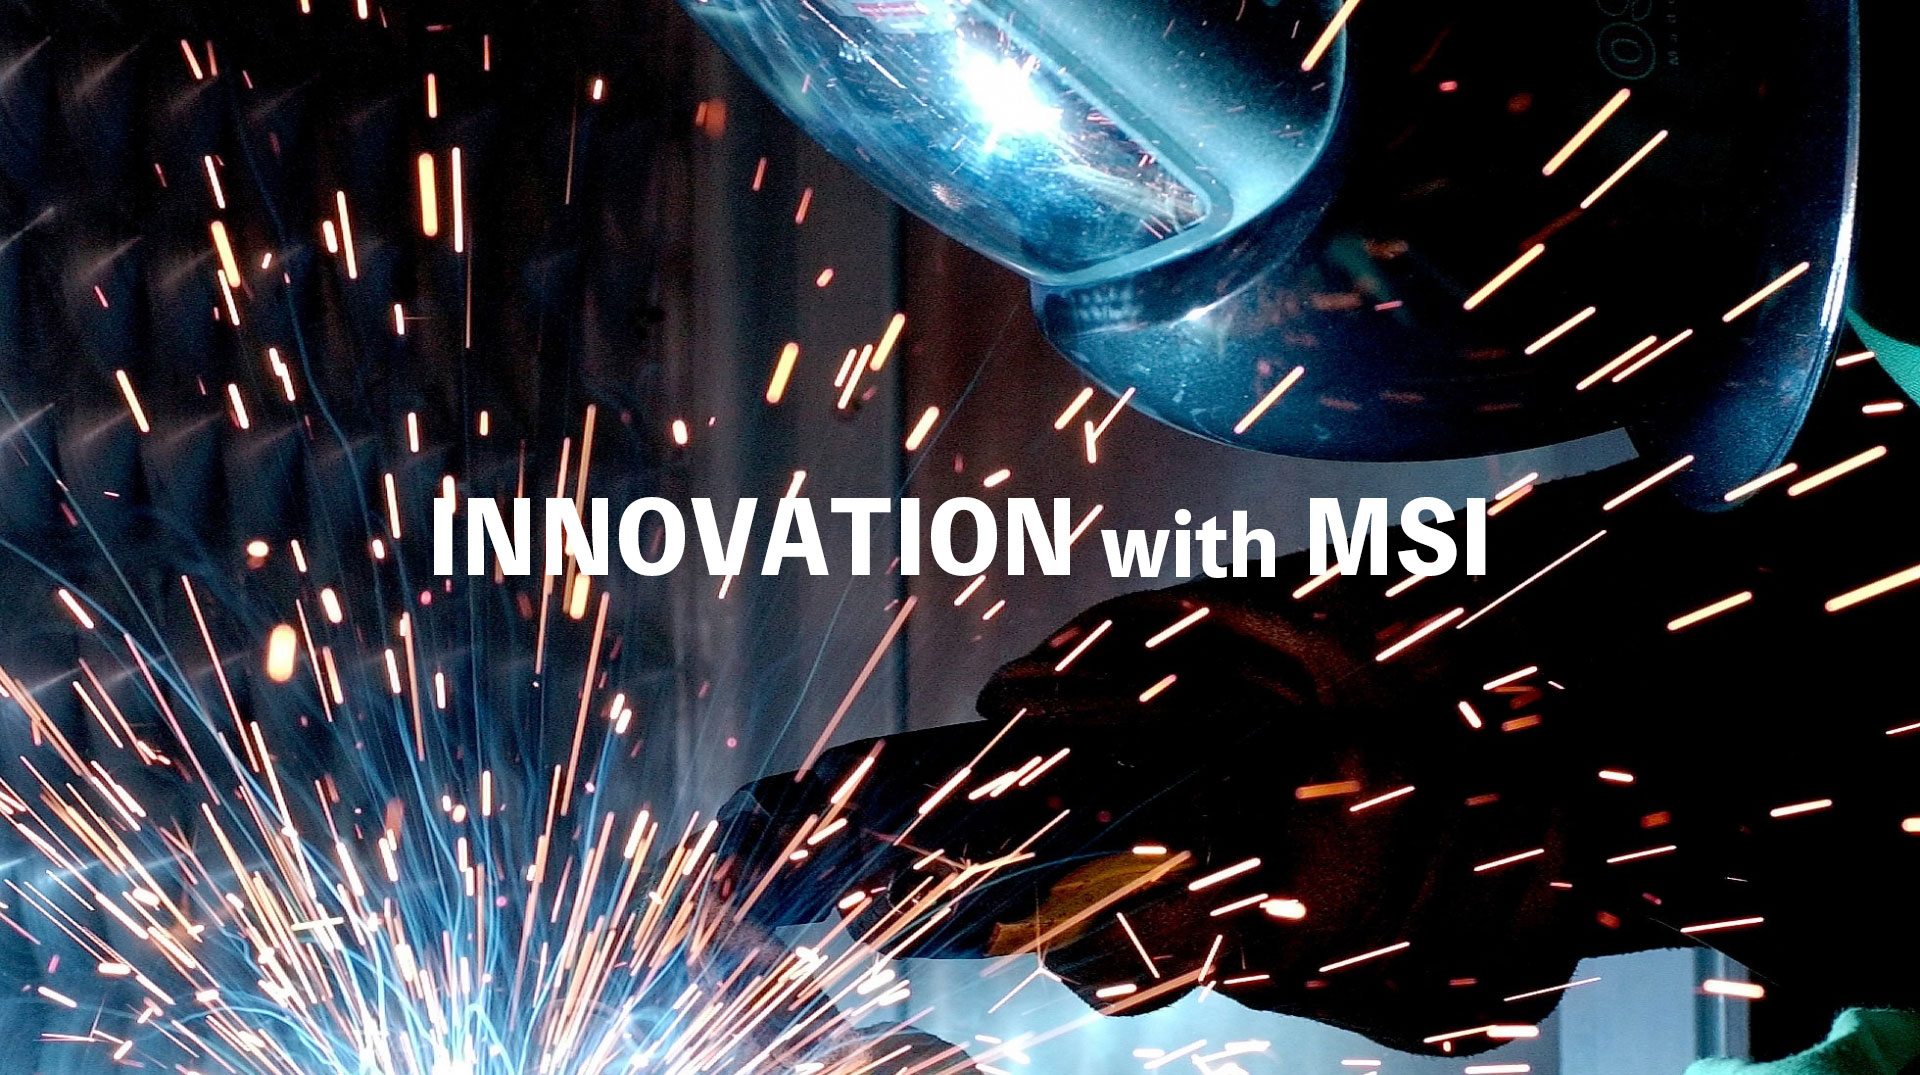 Innovation with MSI